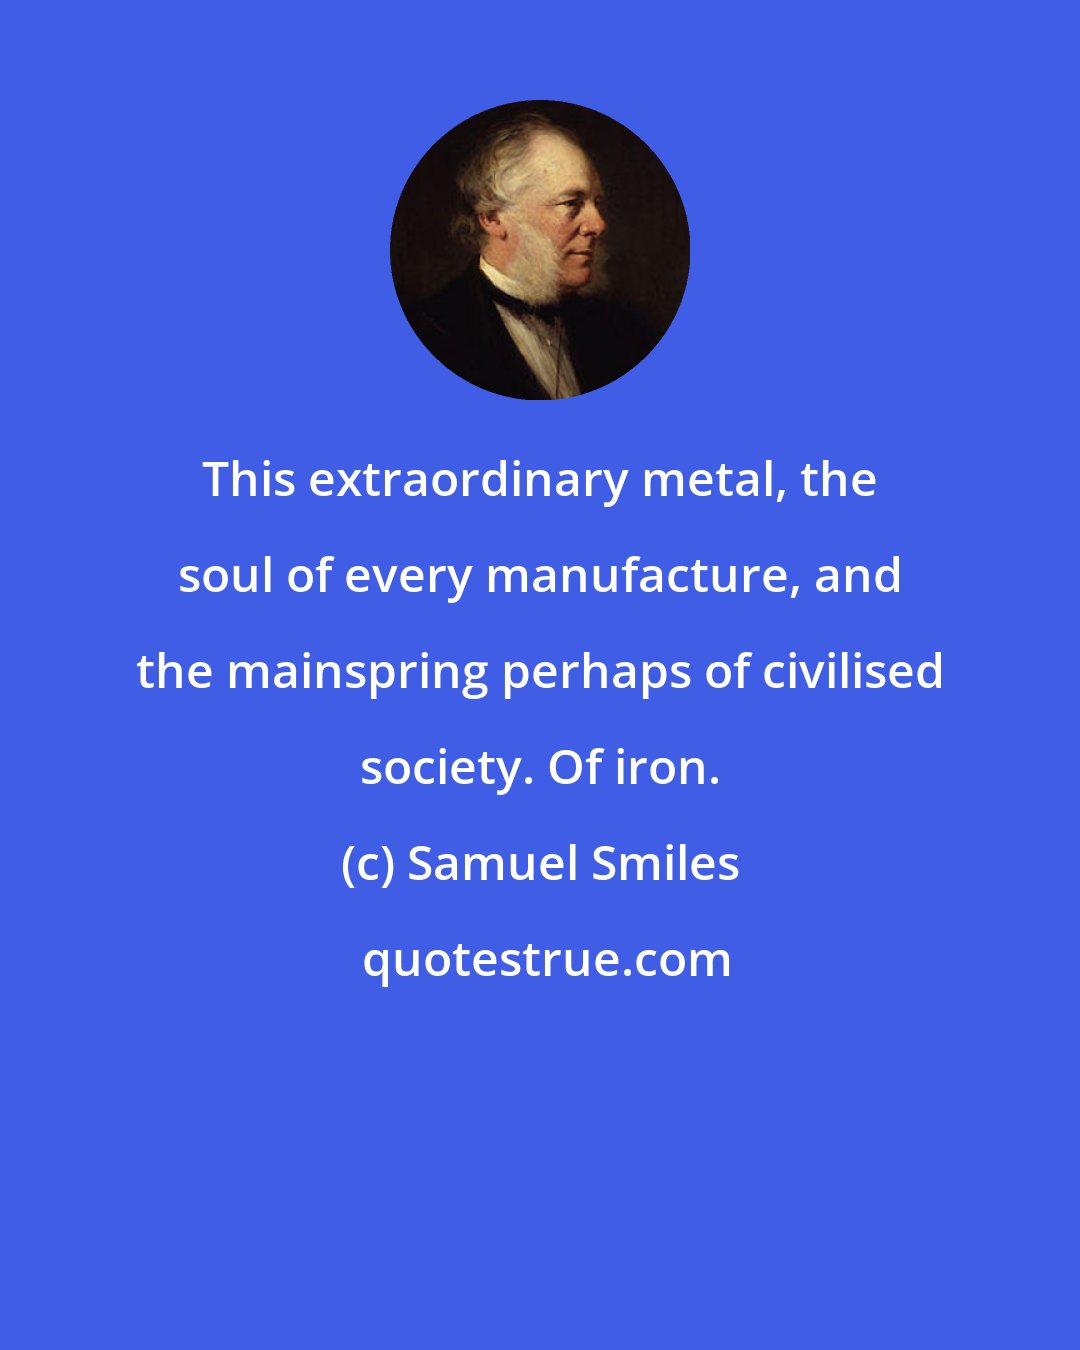 Samuel Smiles: This extraordinary metal, the soul of every manufacture, and the mainspring perhaps of civilised society. Of iron.